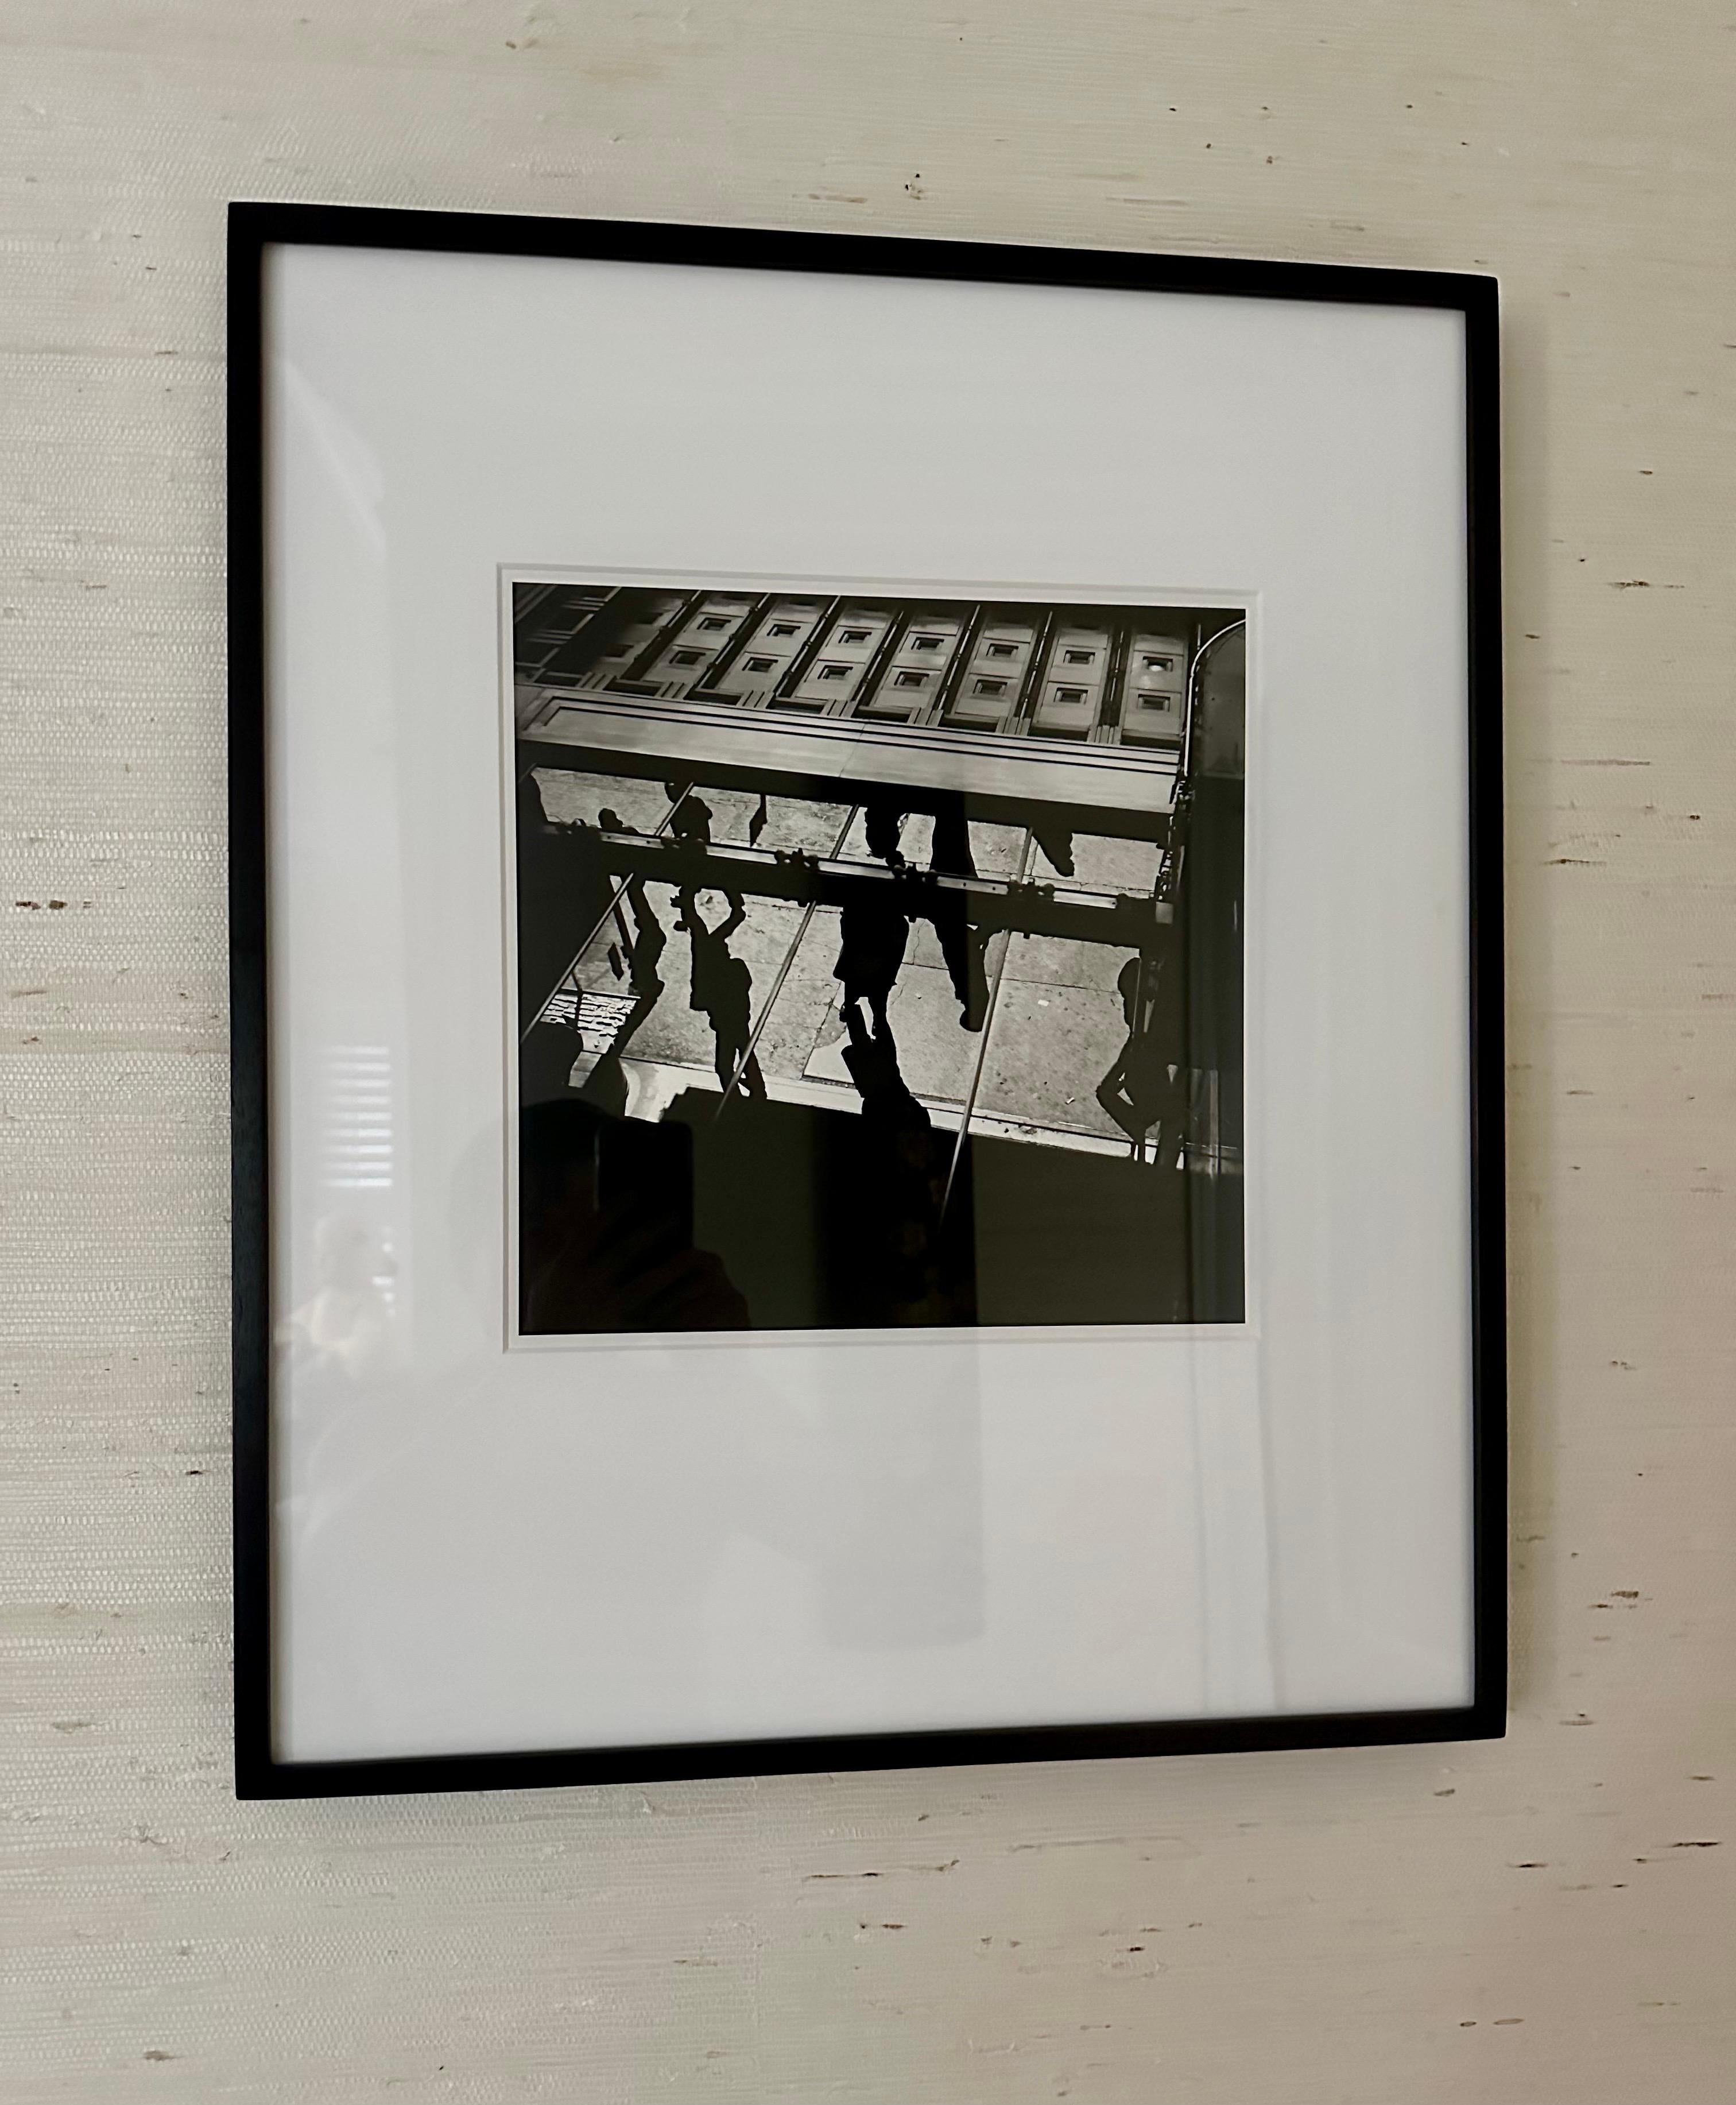 Wood Framed Street Photograph by Vivian Maier Editioned with Provenance For Sale